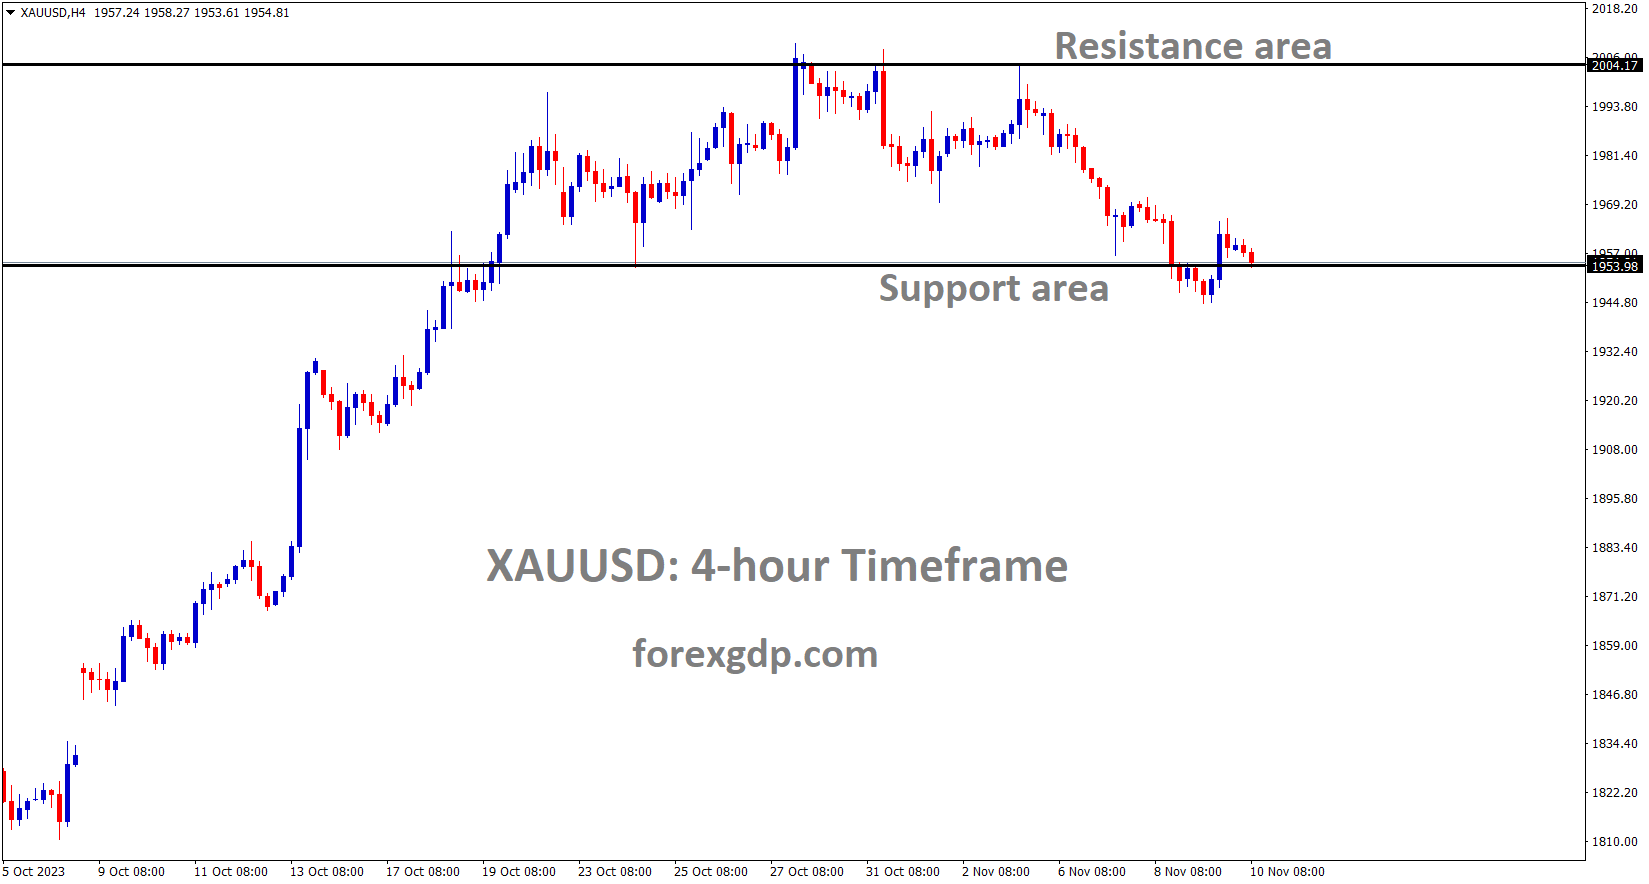 XAUUSD Gold Price is moving in the Box pattern and the market has reached the support area of the pattern